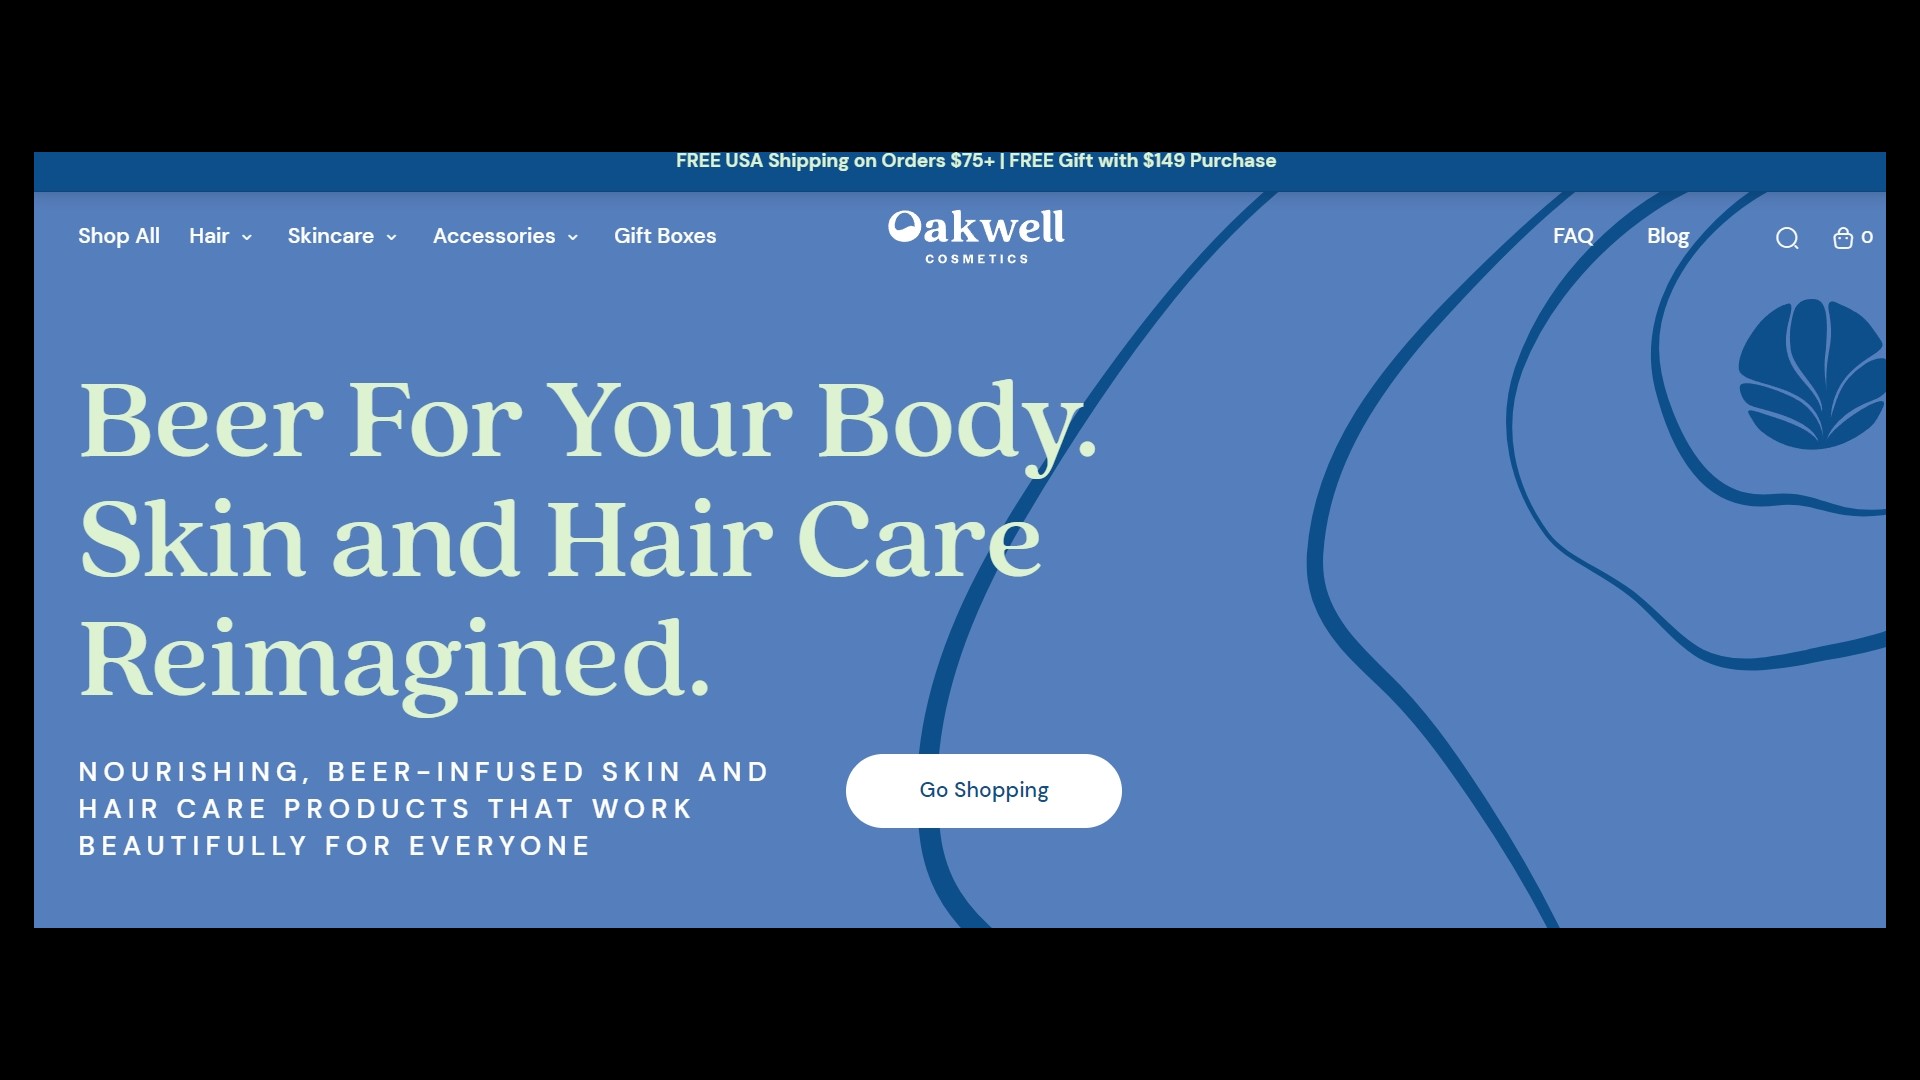 Visit OakwellCosmetics.com to learn about all their awesome products and about the Beer Spa!